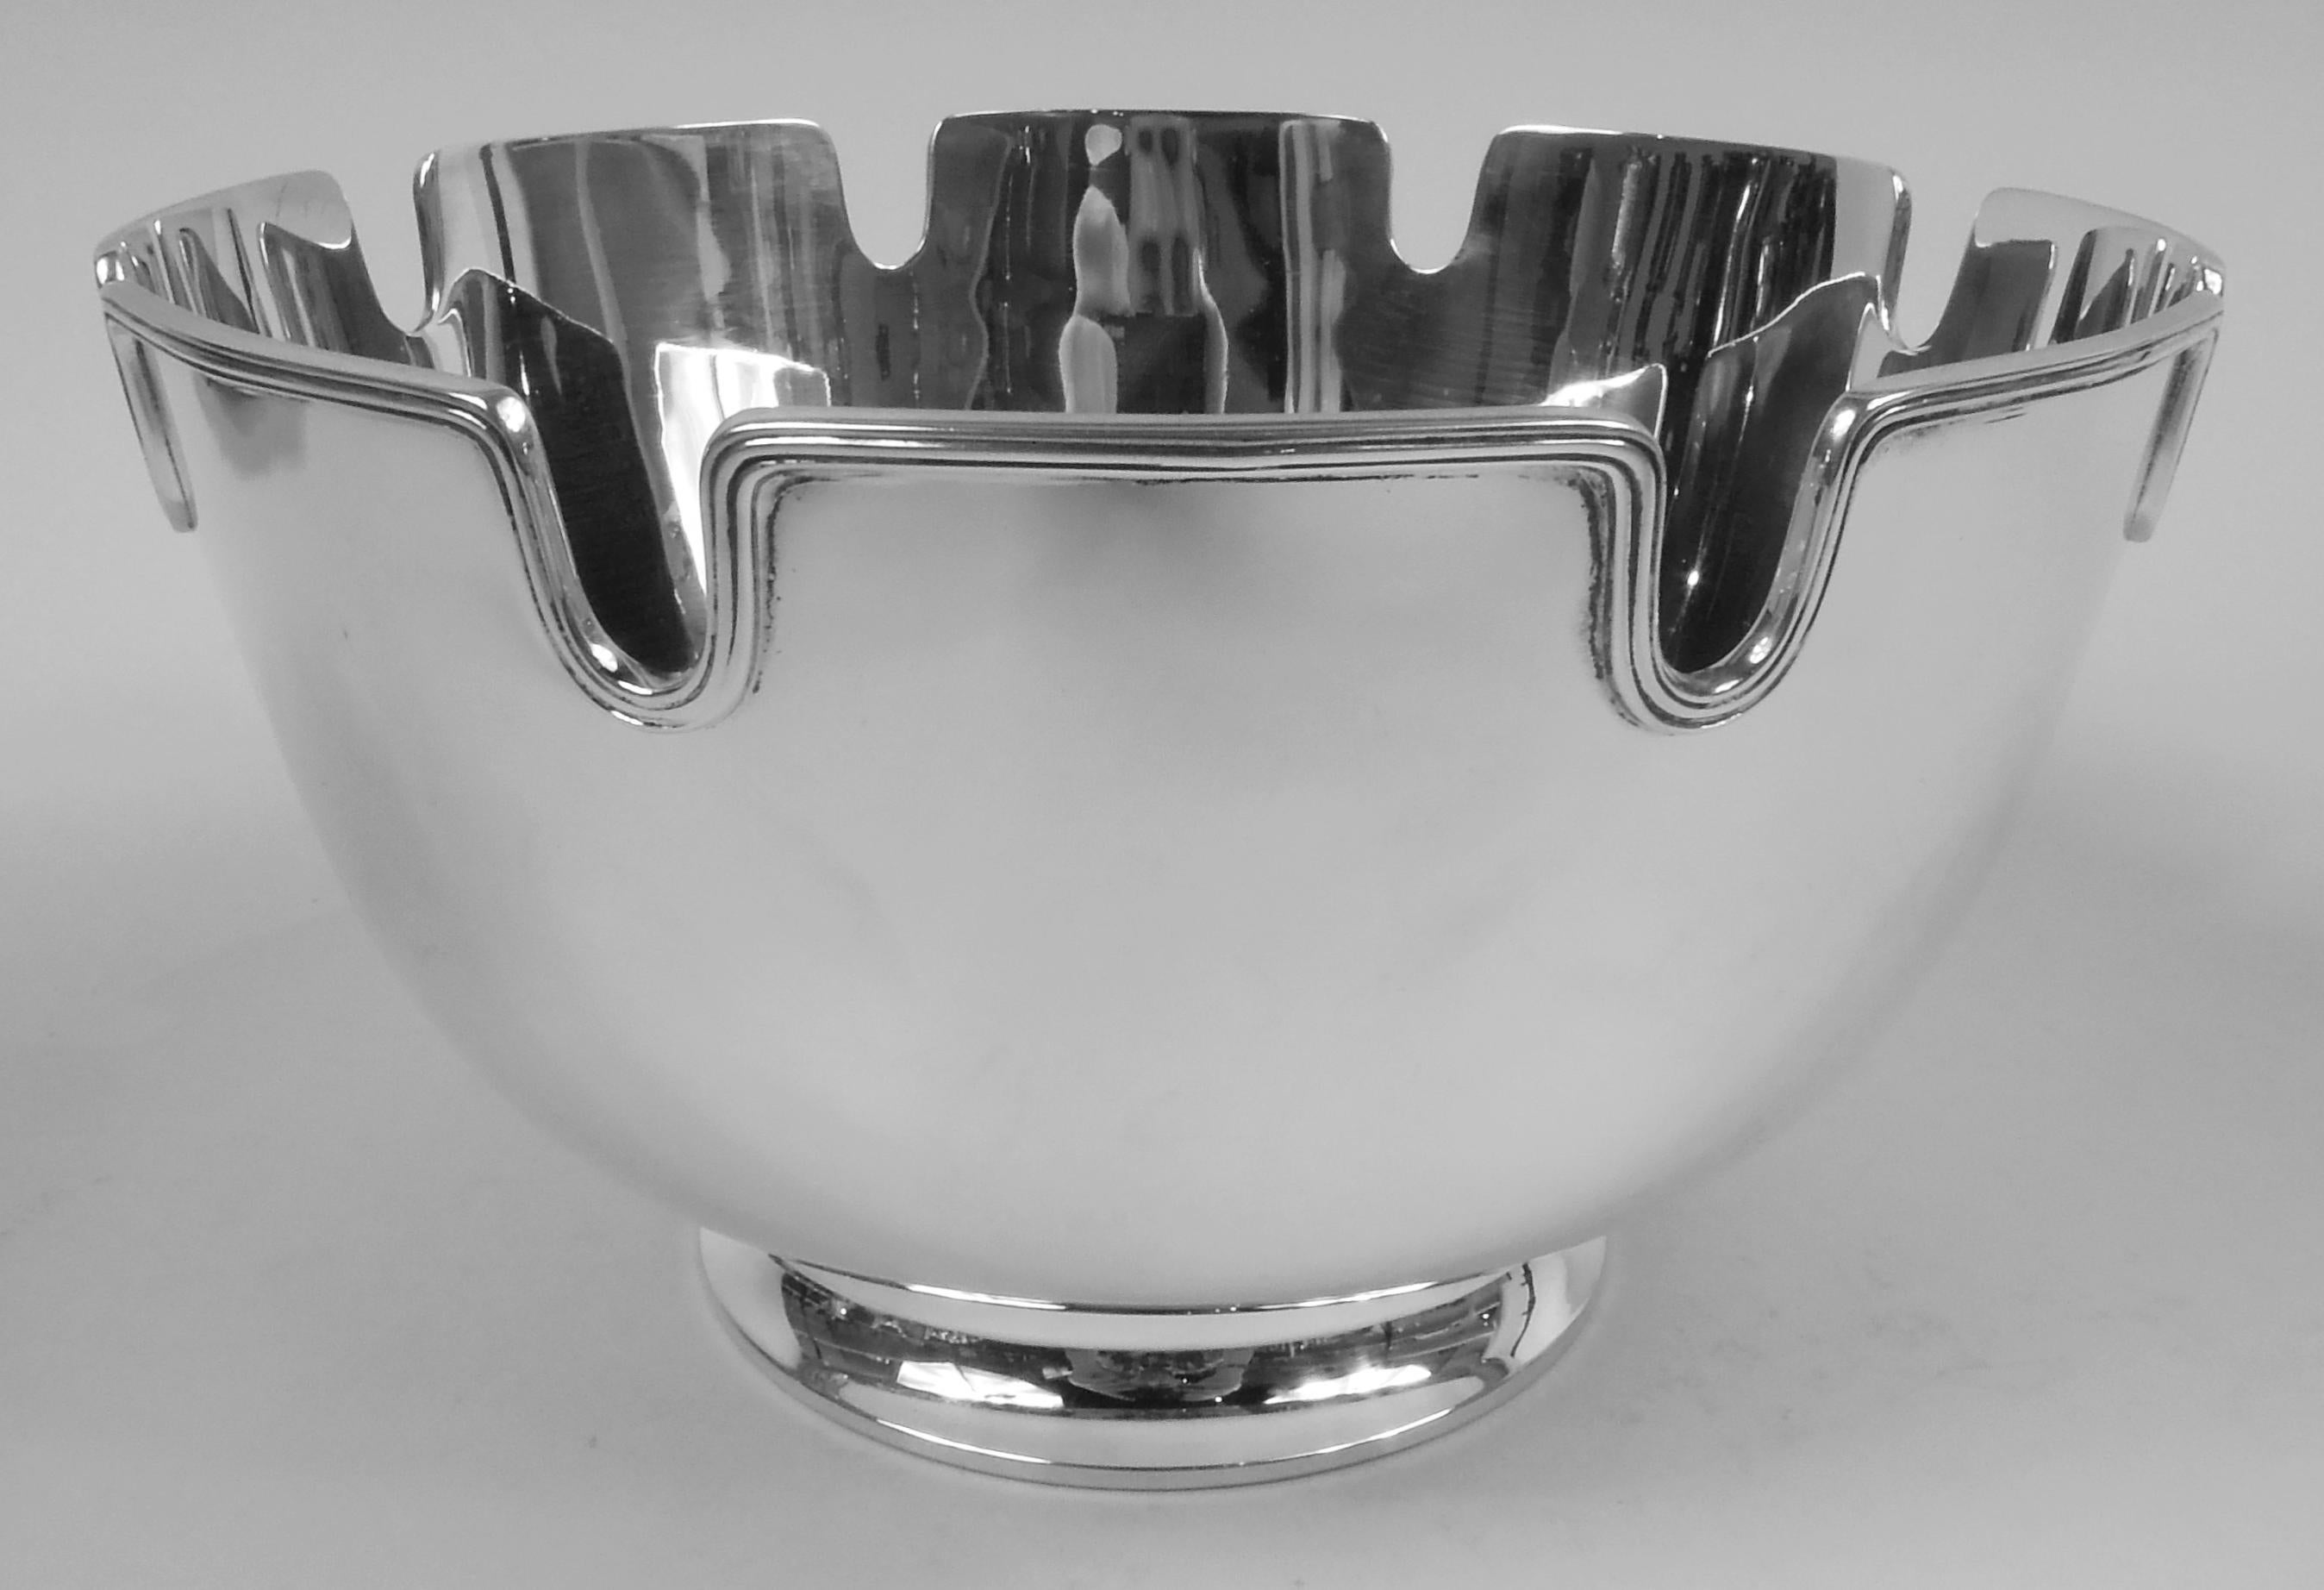 Midcentury Modern sterling silver monteith bowl. Made by Tiffany & Co. in New York. Curved sides and reeded curvilinear rim; raised and spread foot. Stylish for serving and presentation. Plenty of room for engraving. Fully marked including maker’s